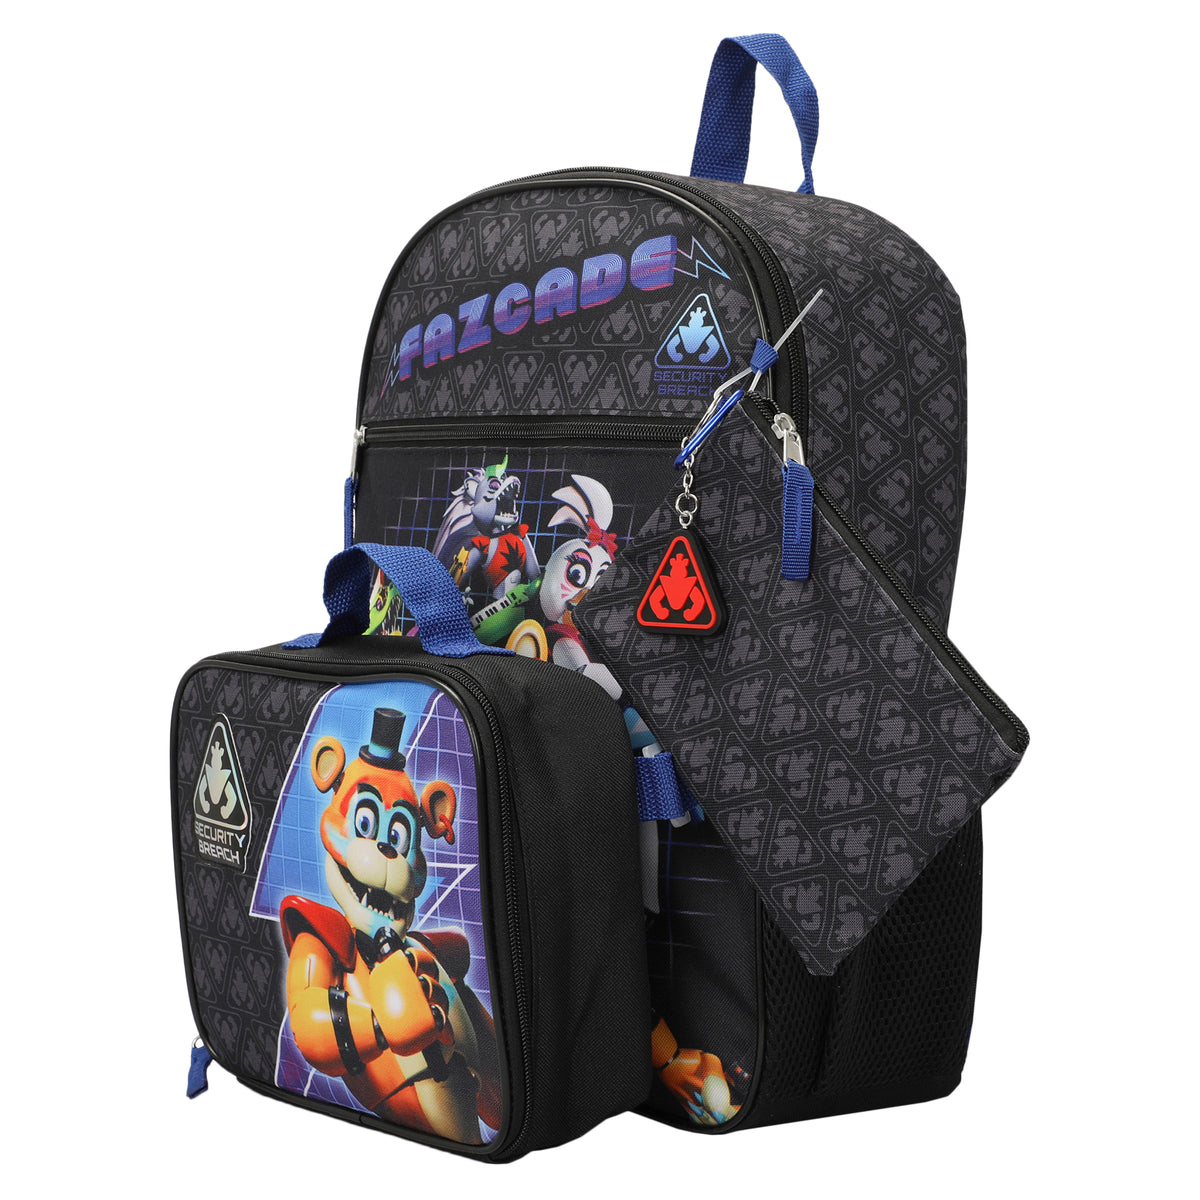 Five Nights at Freddy's Backpack 5 Piece Set